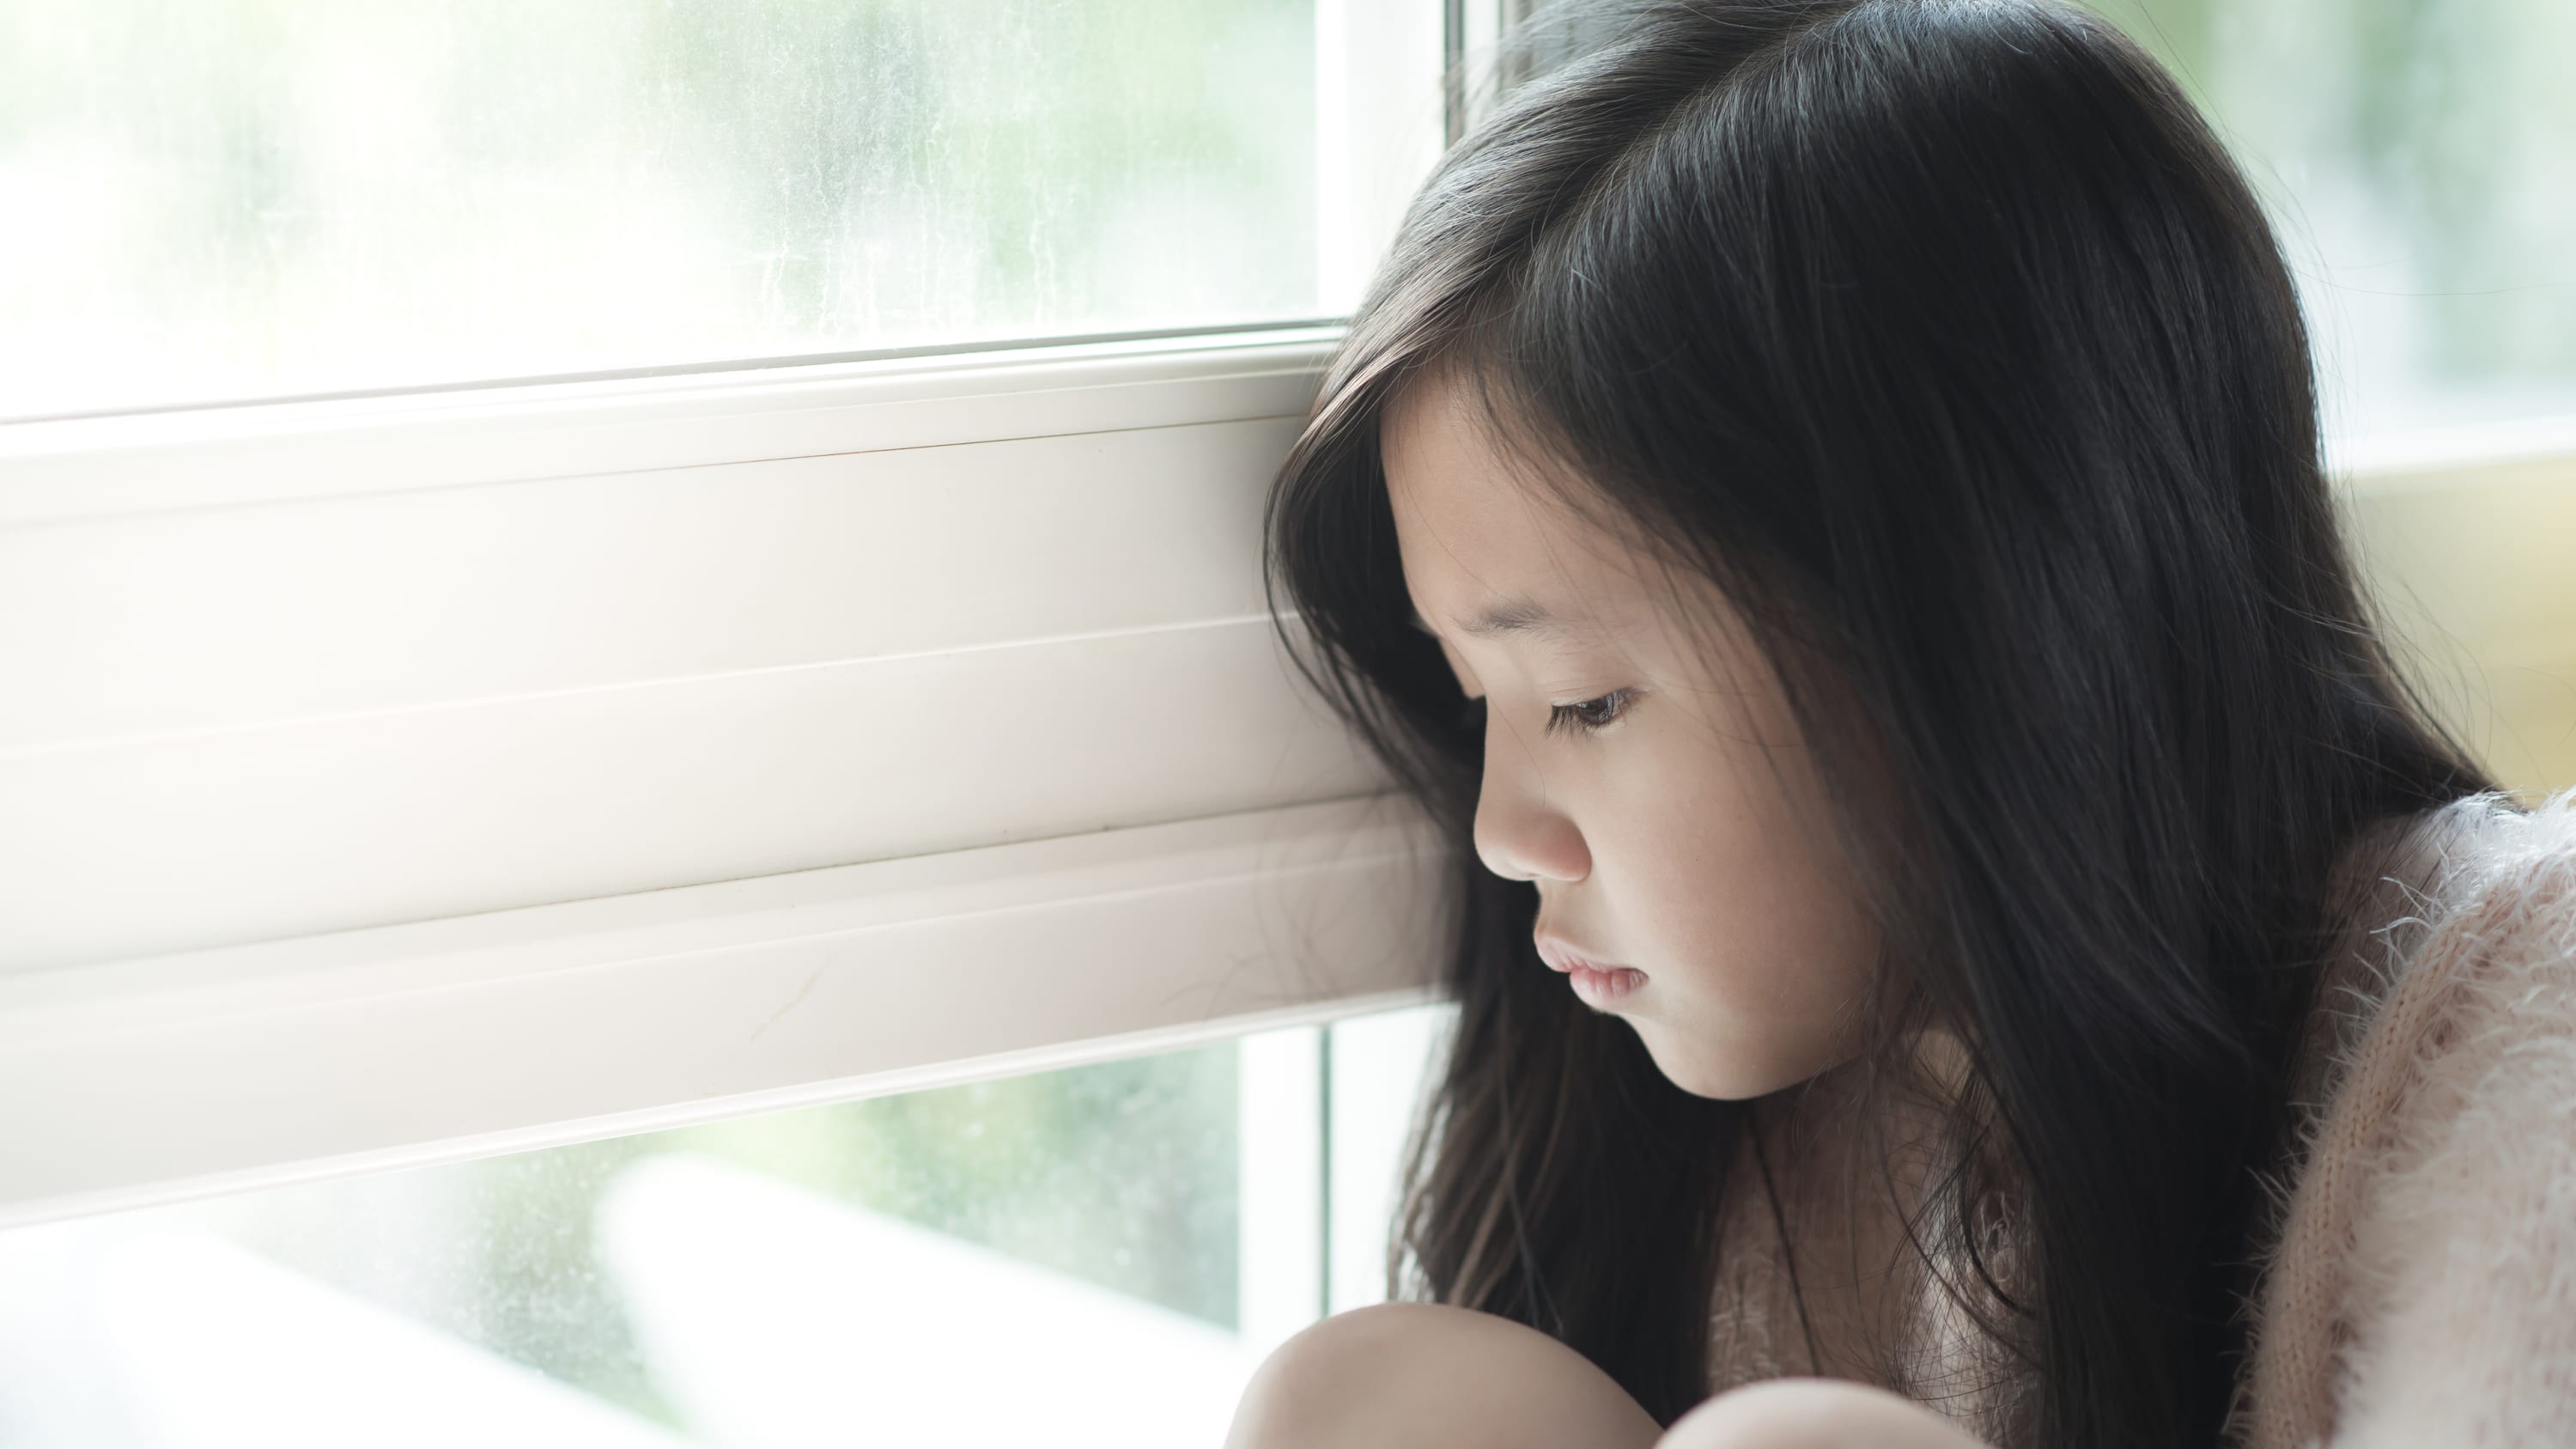 A child who may need a pediatric kidney transplant sits by a window